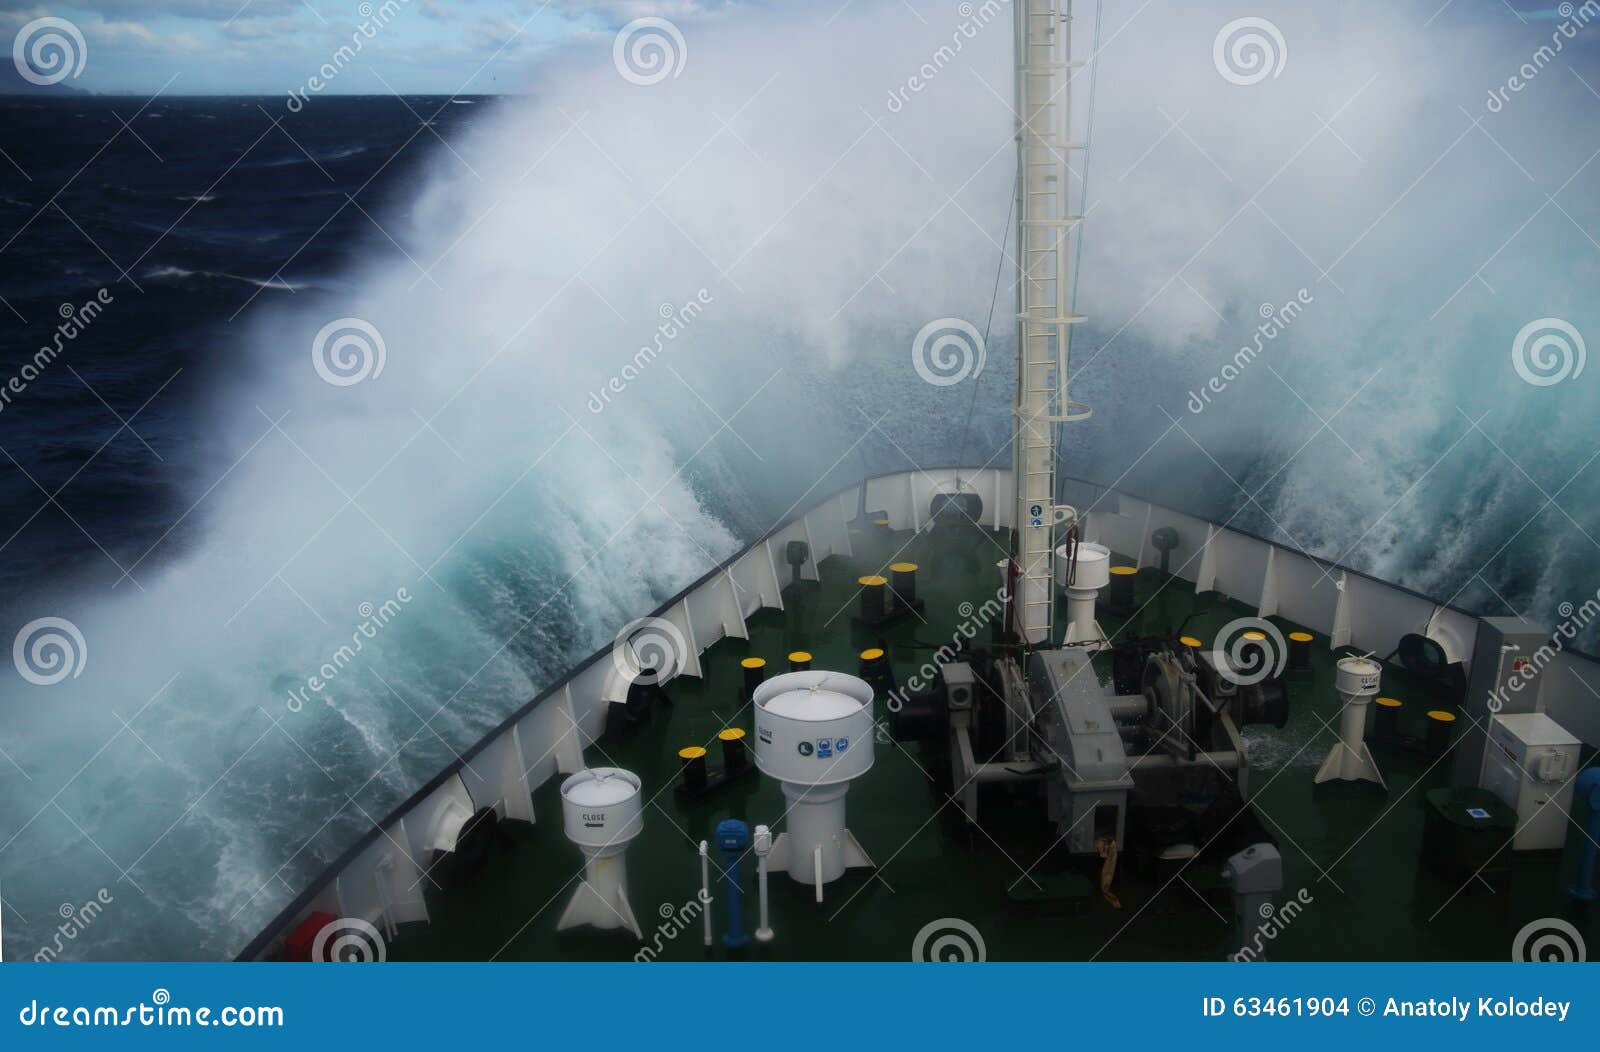 wave rolling over the snout of the ship